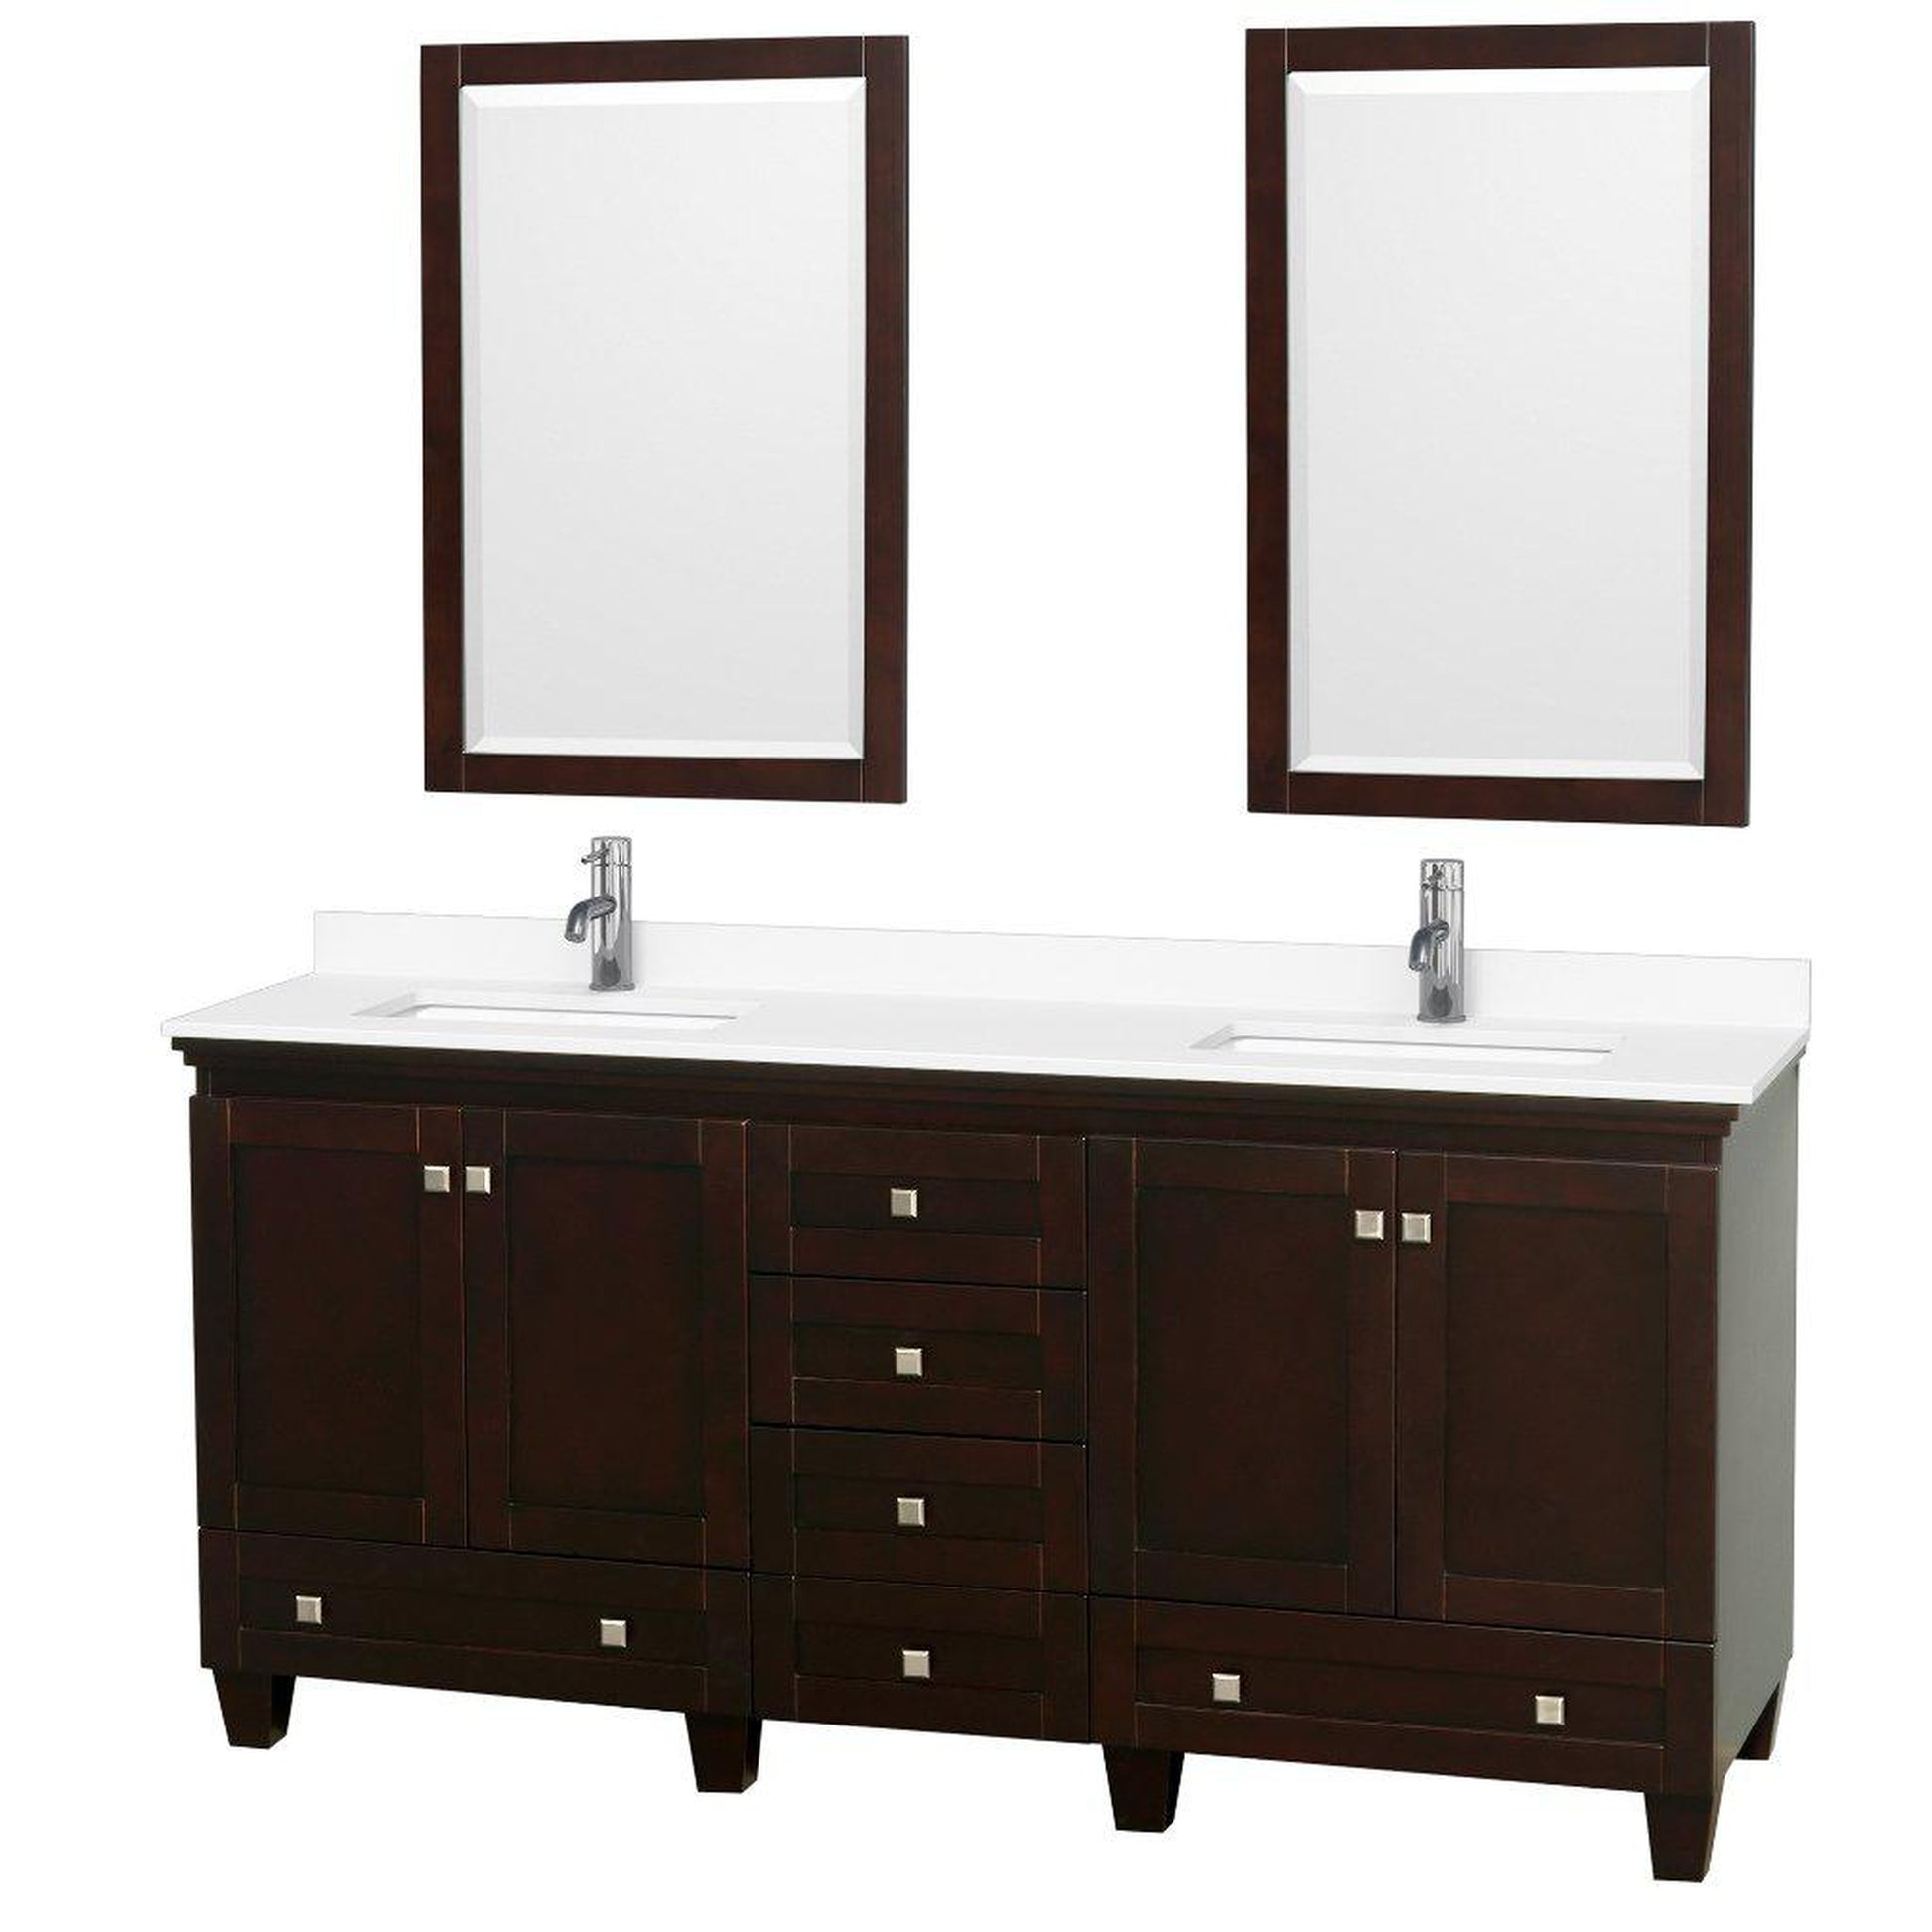 Wyndham Collection Acclaim 72" Double Bathroom Espresso Vanity With White Cultured Marble Countertop And Undermount Square Sinks And 2 Set Of 24" Mirror